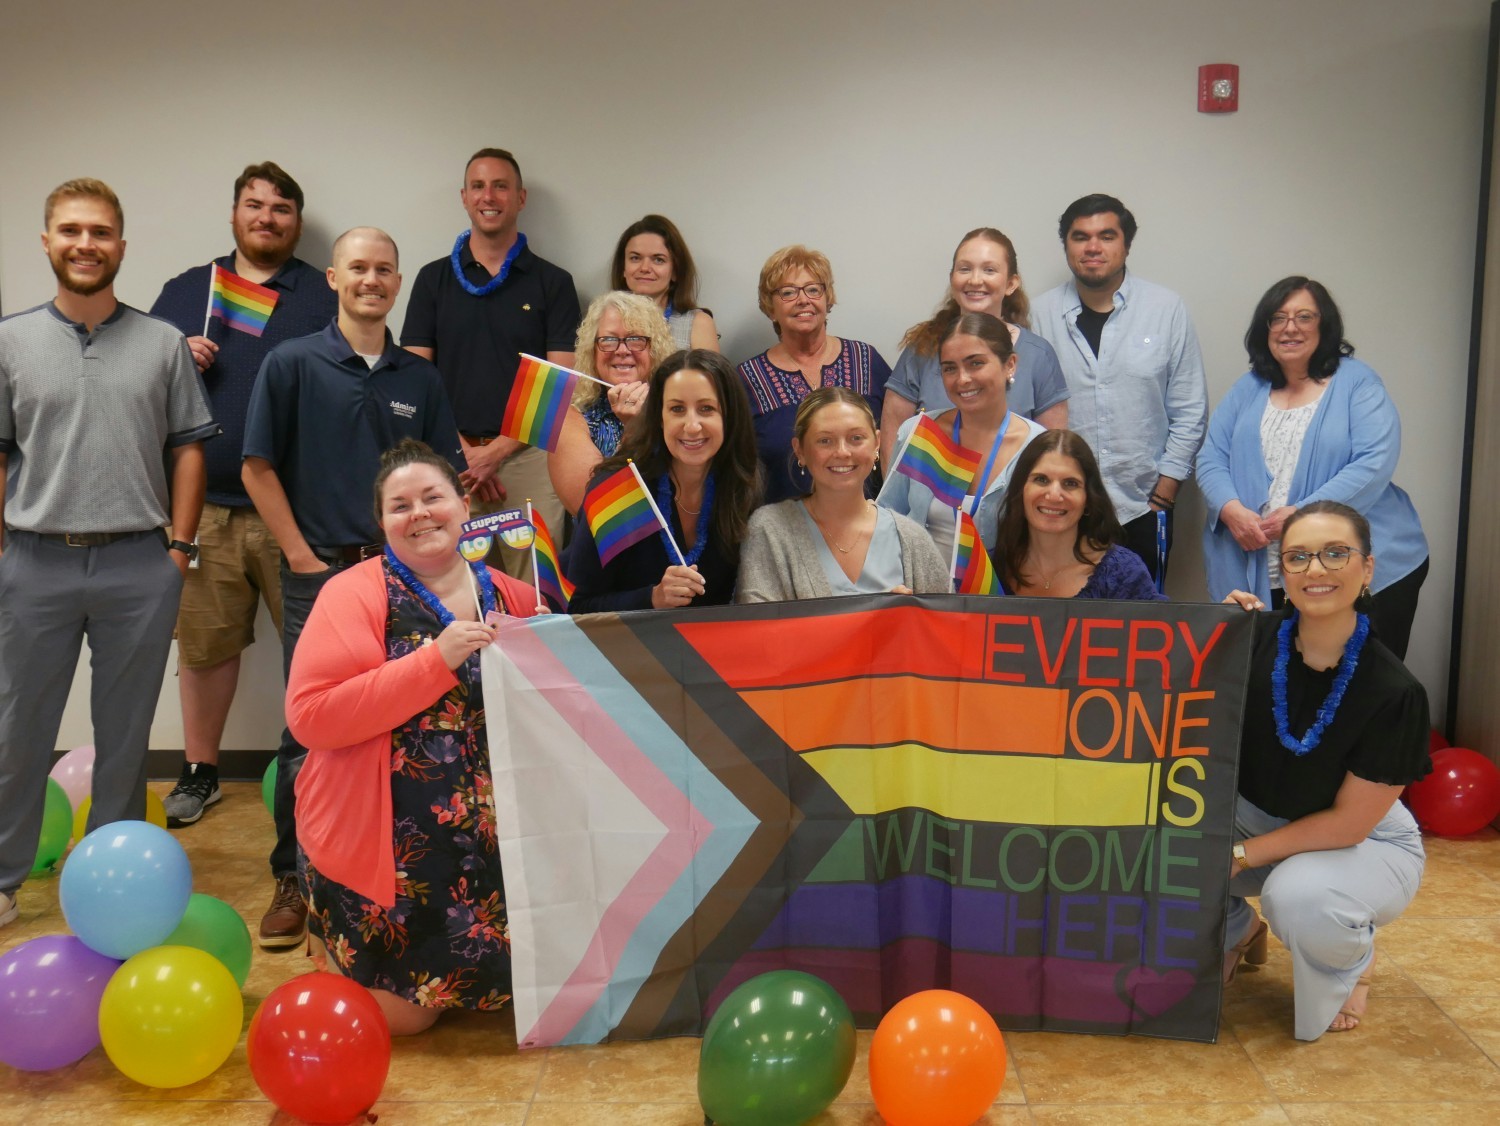 Admiral honored and supported it employees and partners during Pride Month